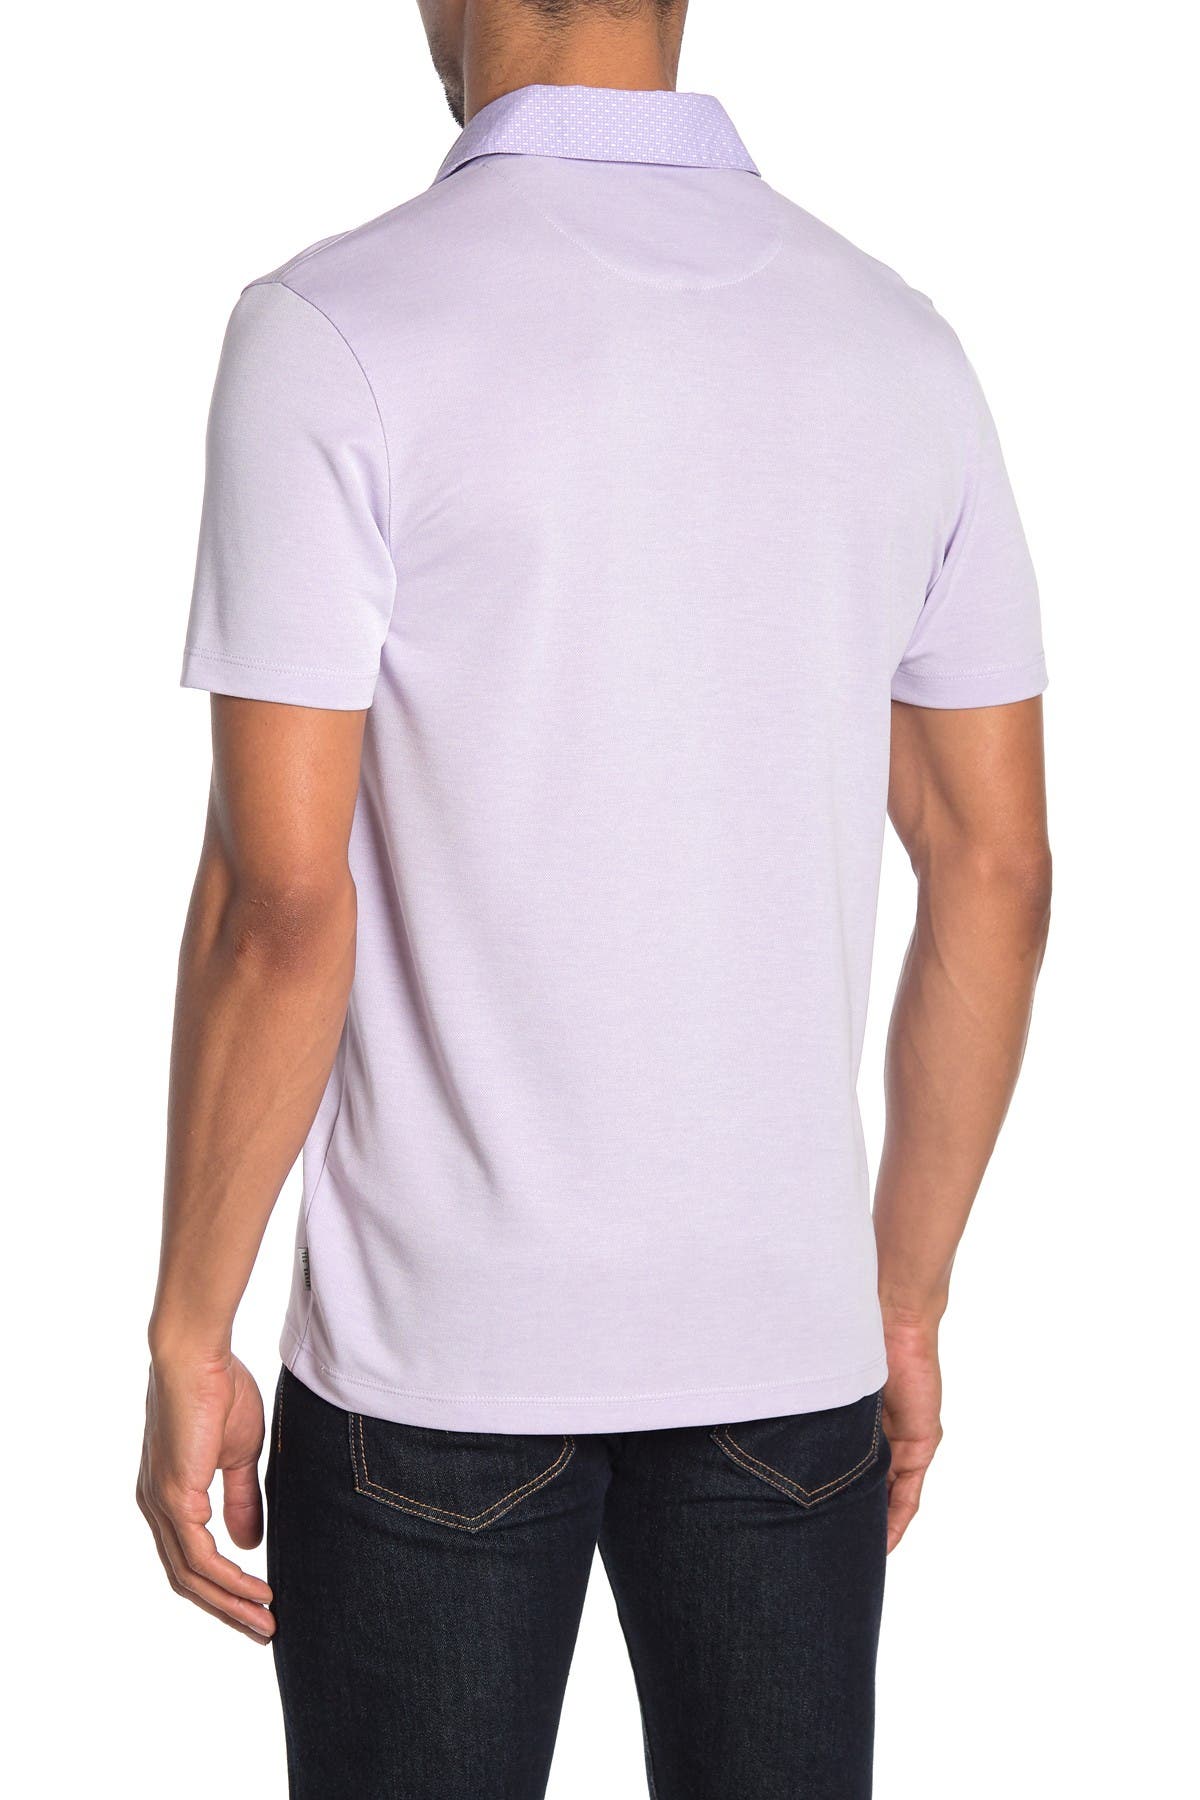 Ted Baker Woven Collar Short Sleeve Polo In Light/pastel Purple1